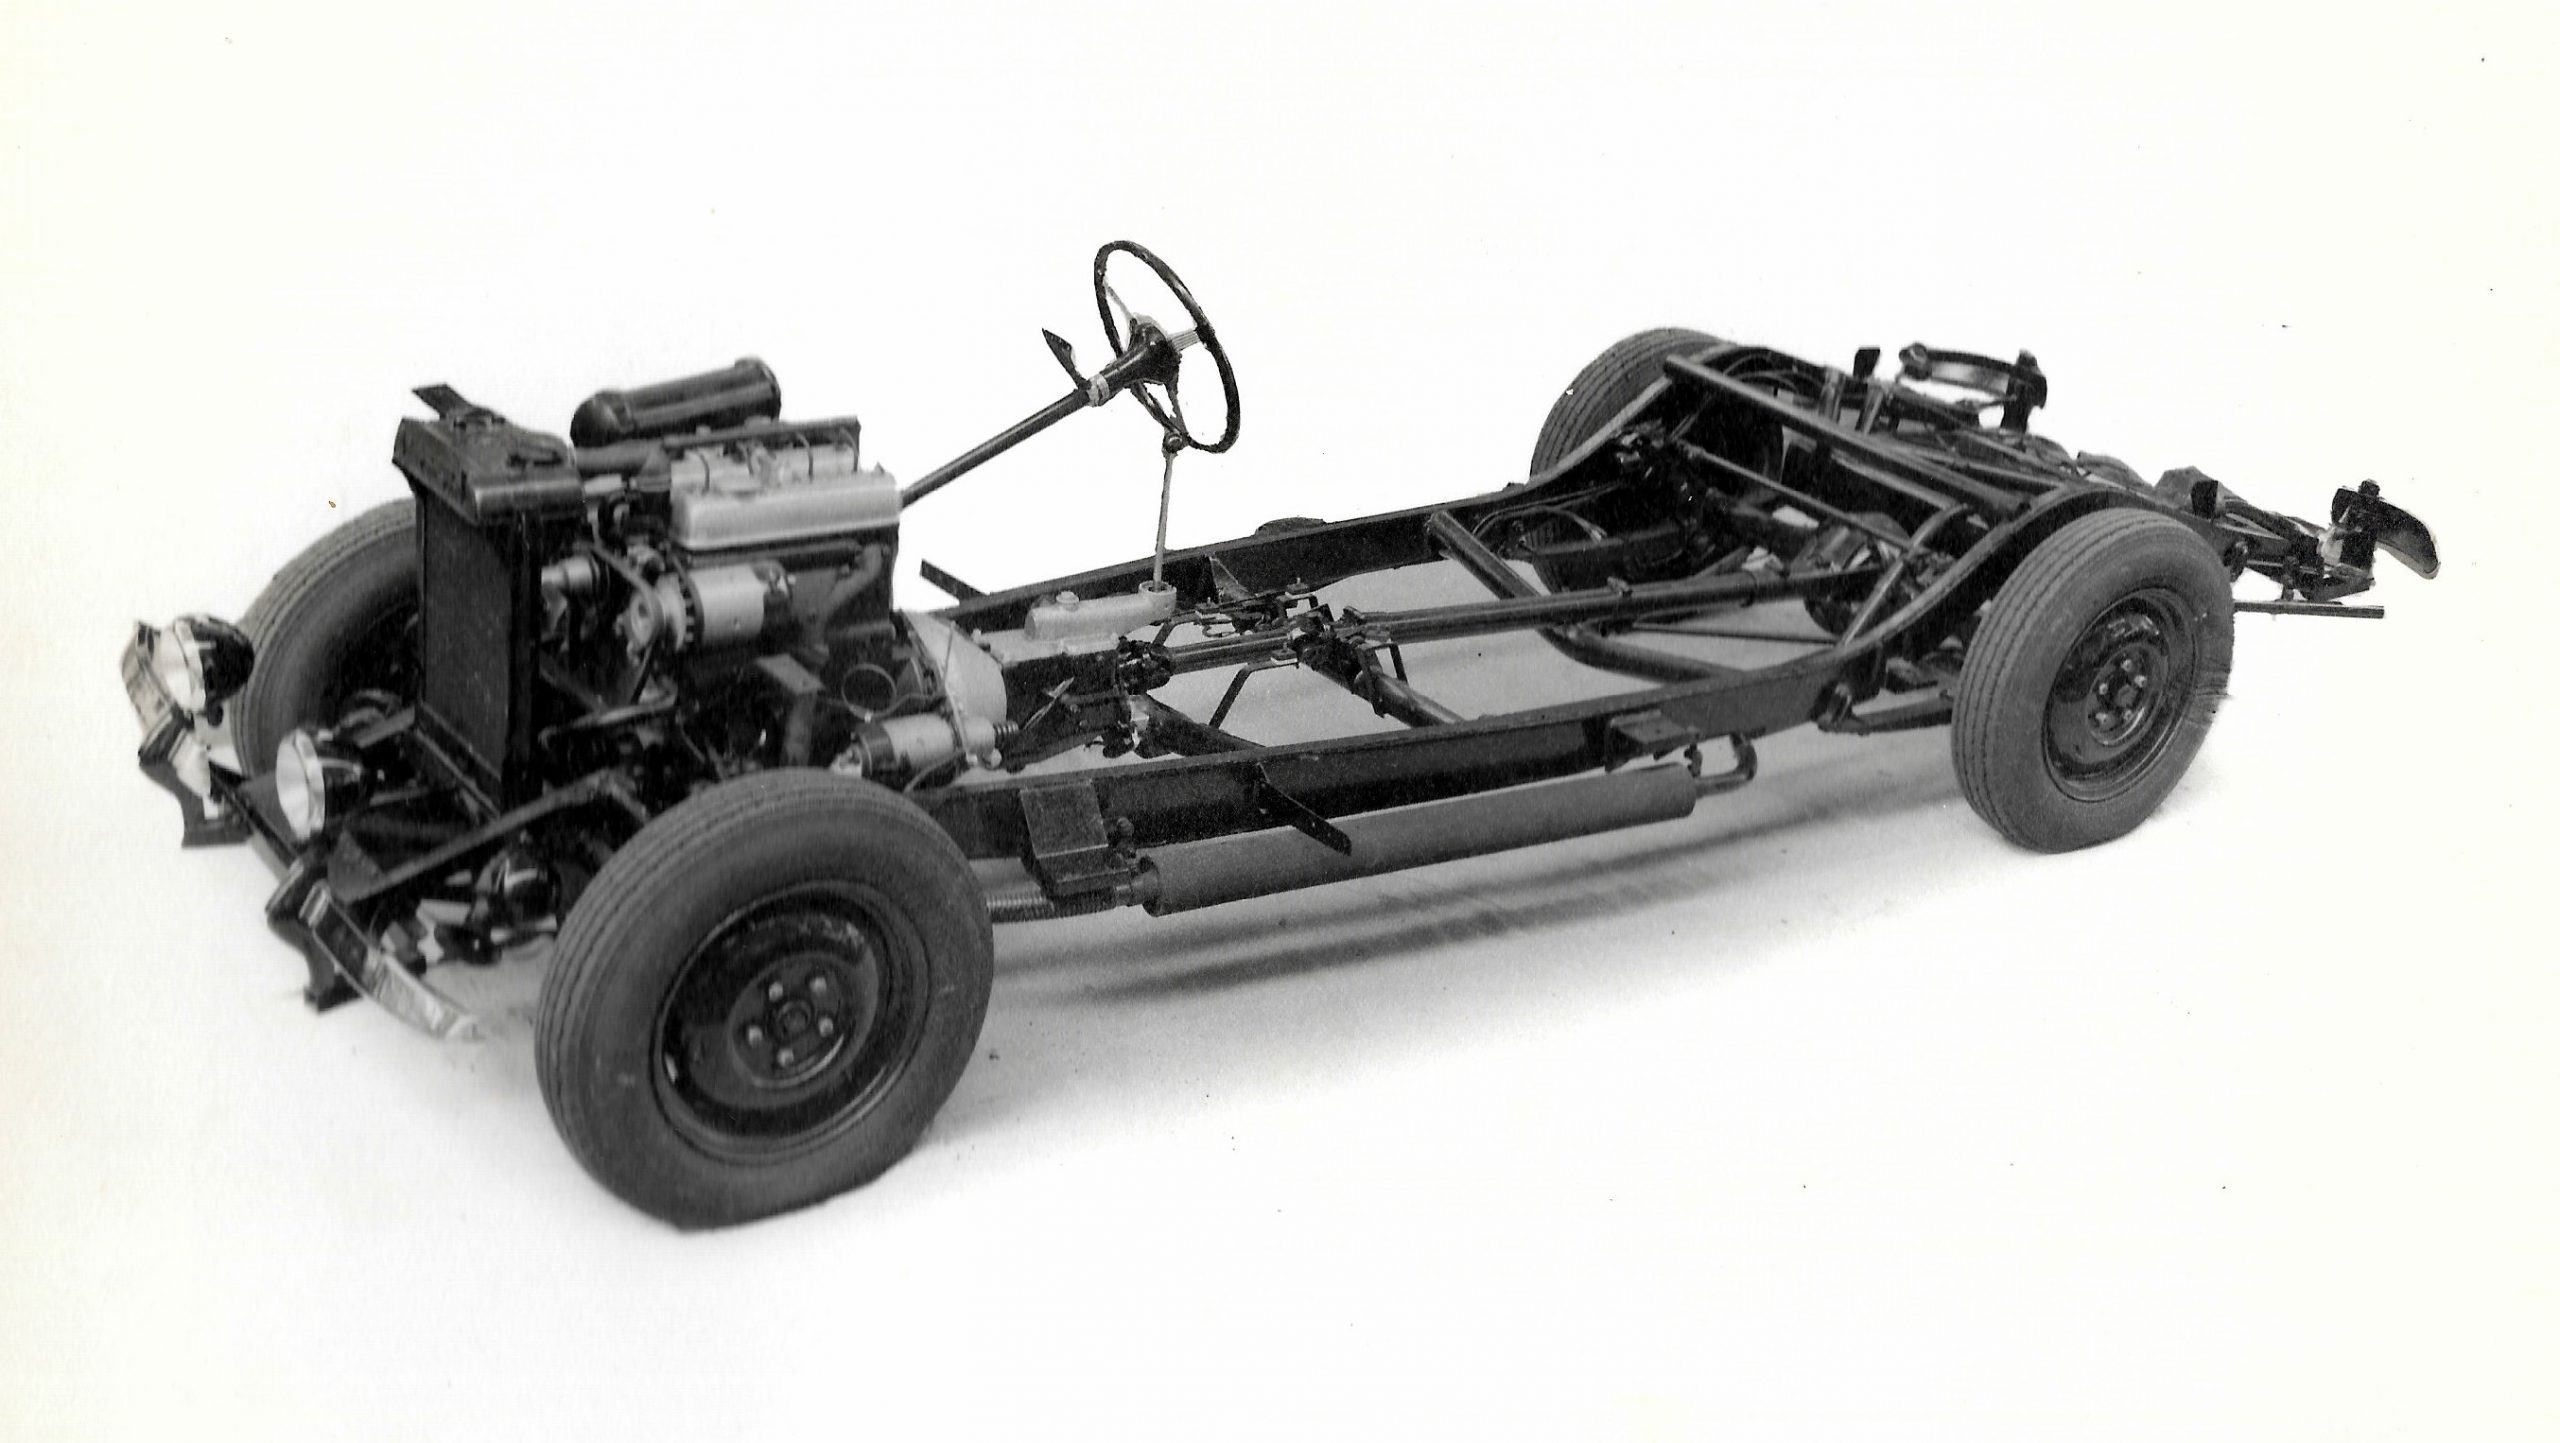 Bare chassis